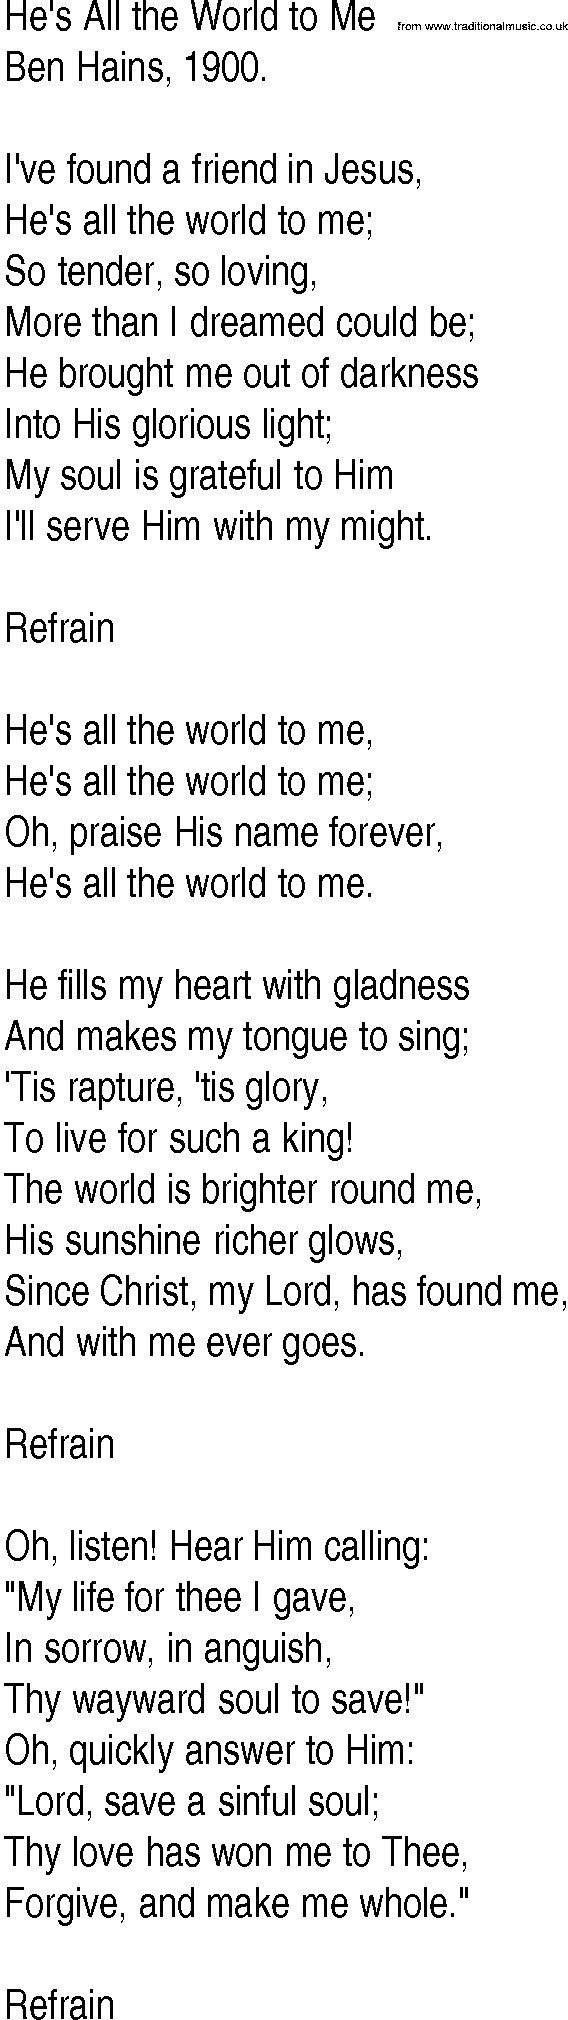 Hymn and Gospel Song: He's All the World to Me by Ben Hains lyrics